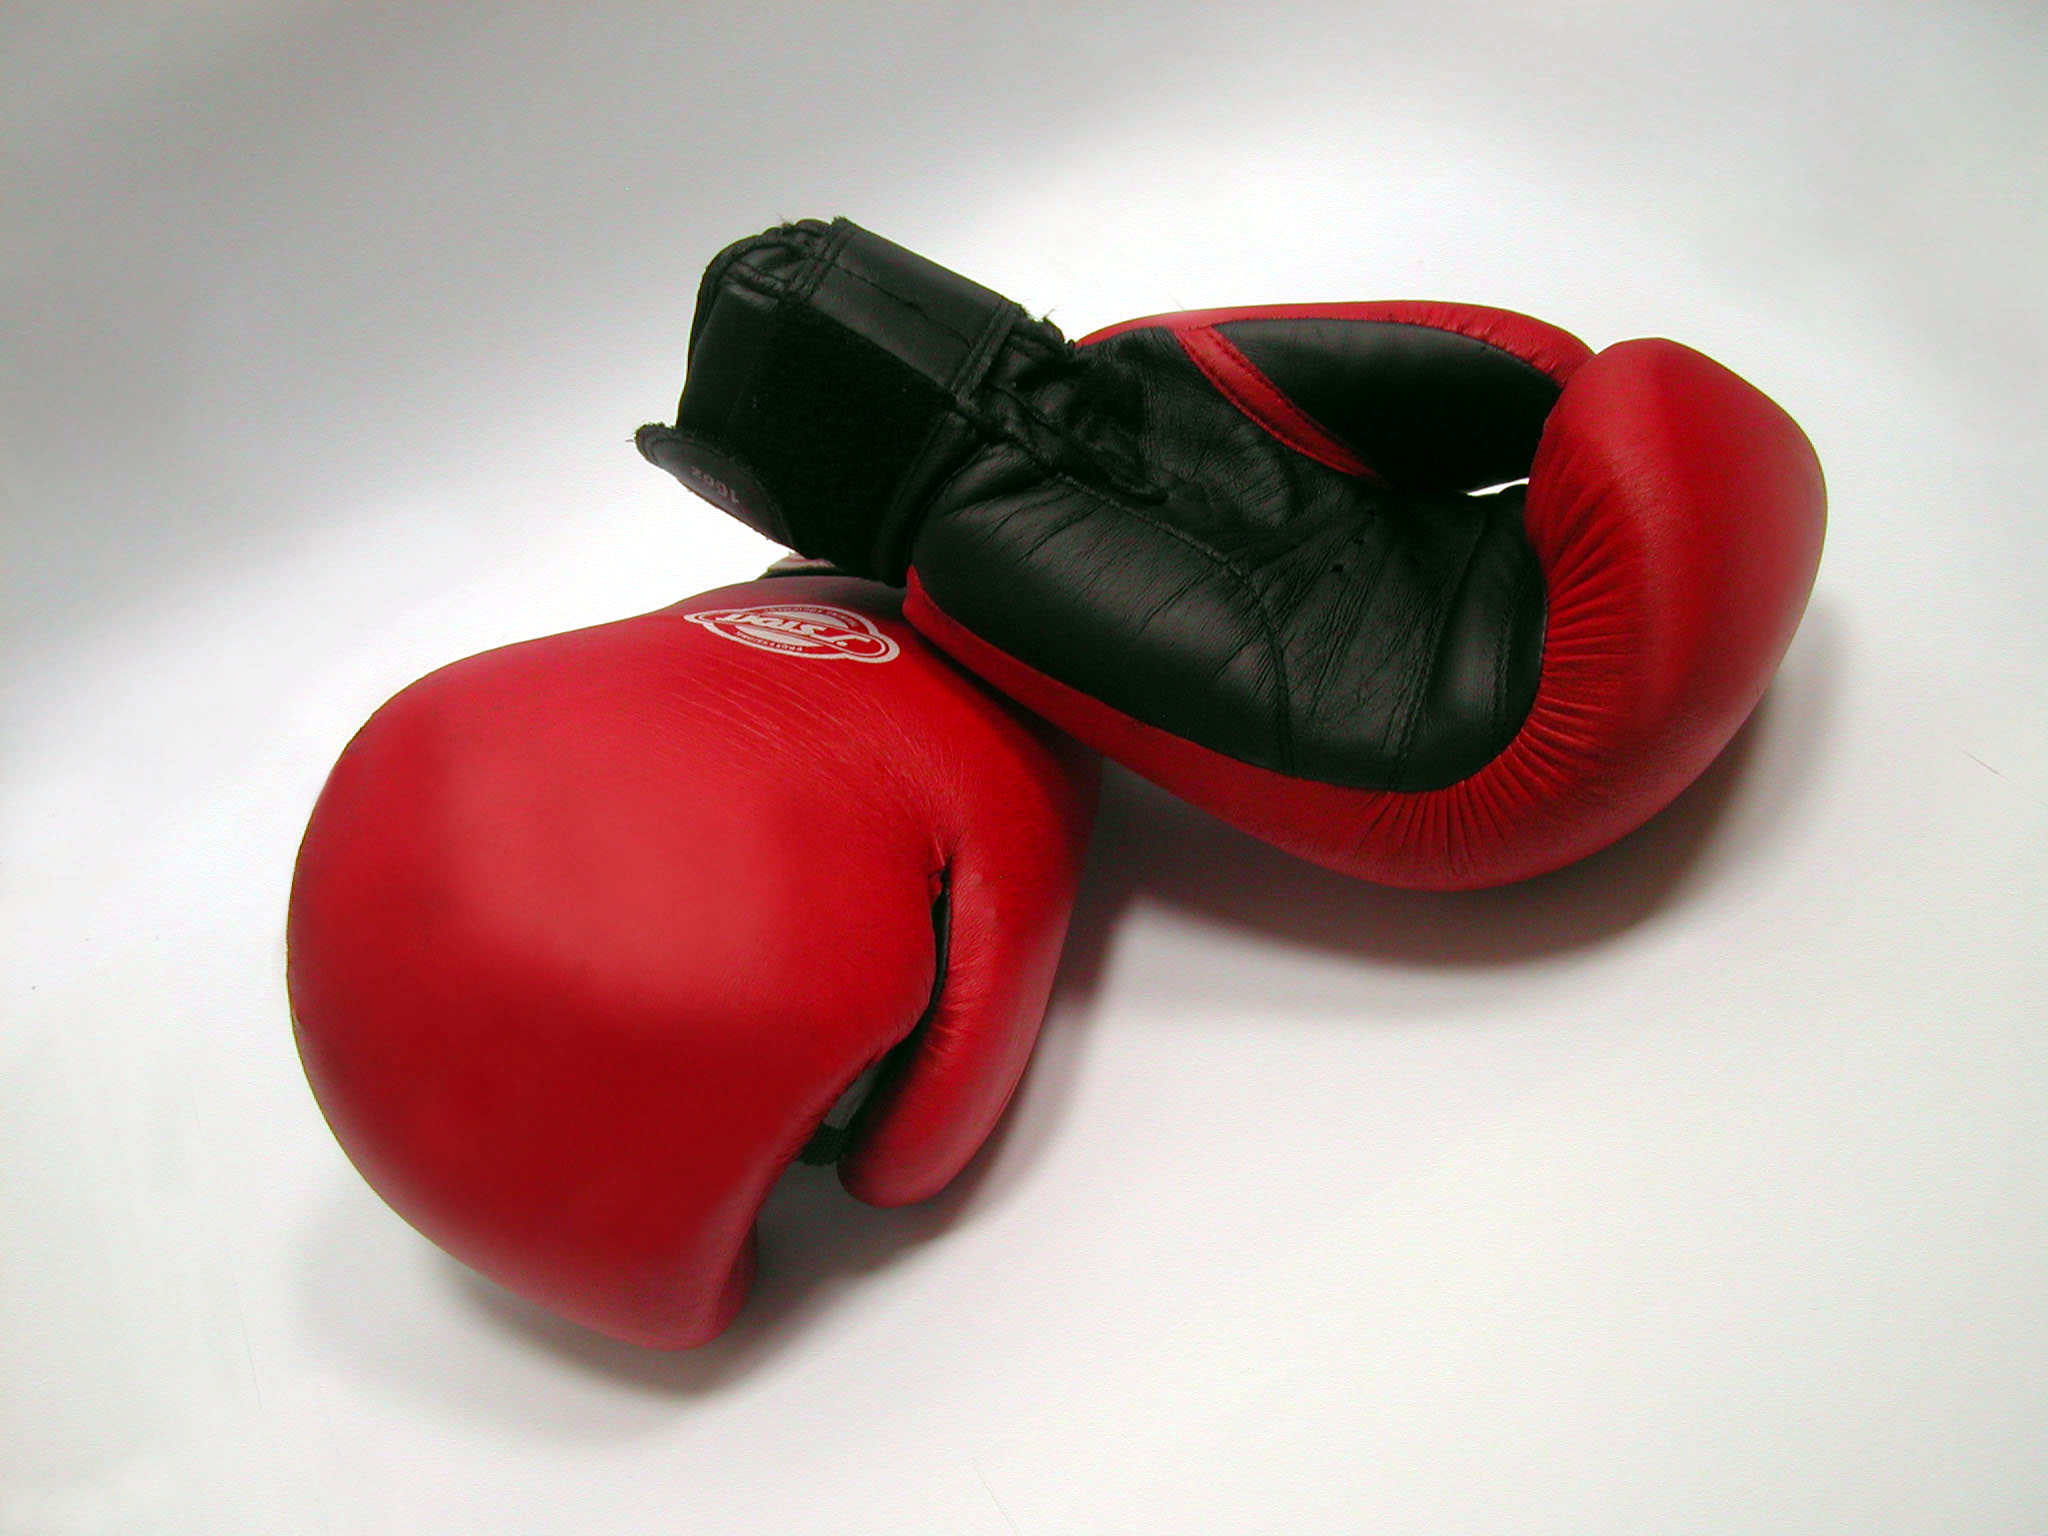 National boxers gear up for European championship